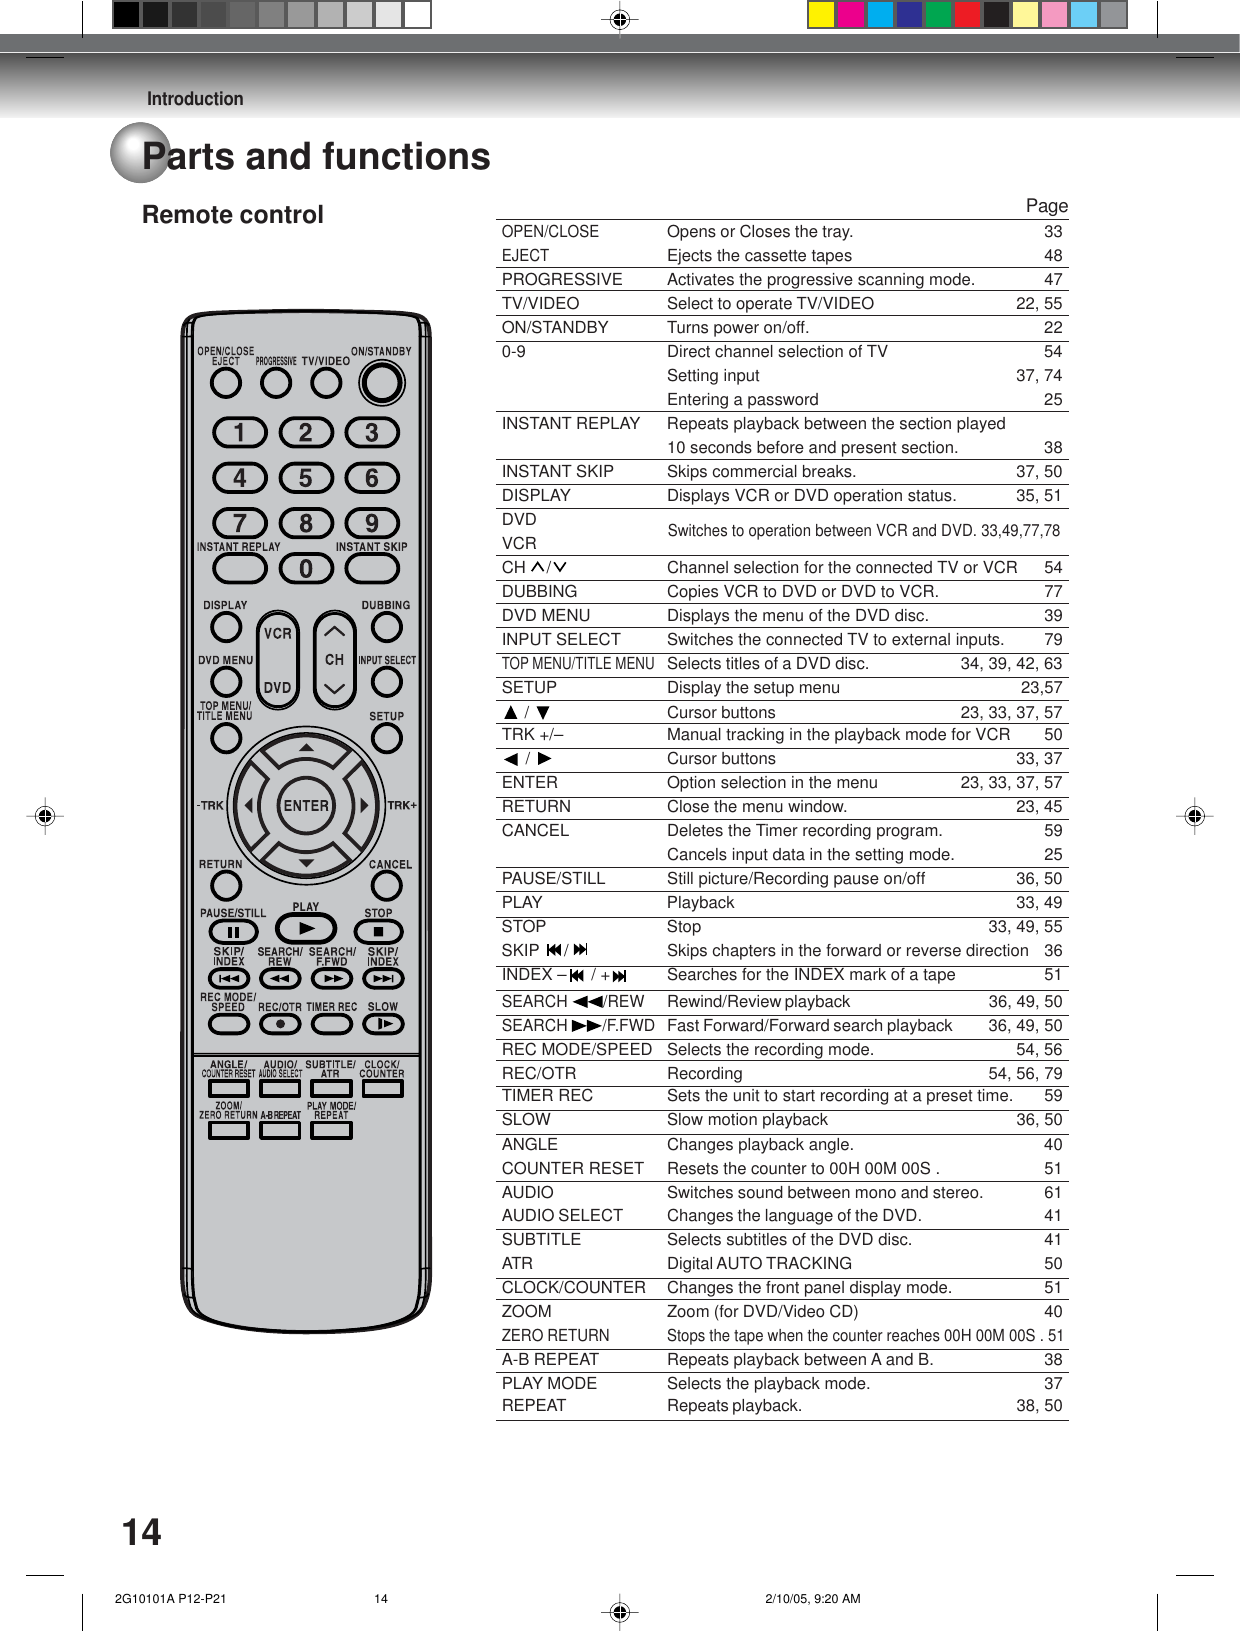 Introduction14OPEN/CLOSEOpens or Closes the tray. 33EJECTEjects the cassette tapes 48PROGRESSIVE Activates the progressive scanning mode. 47TV/VIDEO Select to operate TV/VIDEO 22, 55ON/STANDBY Turns power on/off. 220-9 Direct channel selection of TV 54Setting input 37, 74Entering a password 25INSTANT REPLAY Repeats playback between the section played10 seconds before and present section. 38INSTANT SKIP Skips commercial breaks. 37, 50DISPLAY Displays VCR or DVD operation status. 35, 51DVDVCRCH / Channel selection for the connected TV or VCR 54DUBBING Copies VCR to DVD or DVD to VCR. 77DVD MENU Displays the menu of the DVD disc. 39INPUT SELECT Switches the connected TV to external inputs. 79TOP MENU/TITLE MENUSelects titles of a DVD disc. 34, 39, 42, 63SETUP Display the setup menu 23,57/Cursor buttons 23, 33, 37, 57TRK +/– Manual tracking in the playback mode for VCR 50 /  Cursor buttons 33, 37ENTER Option selection in the menu 23, 33, 37, 57RETURN Close the menu window. 23, 45CANCEL Deletes the Timer recording program. 59Cancels input data in the setting mode. 25PAUSE/STILL Still picture/Recording pause on/off 36, 50PLAY Playback 33, 49STOP Stop 33, 49, 55SKIP / Skips chapters in the forward or reverse direction 36INDEX –  / + Searches for the INDEX mark of a tape 51SEARCH /REWRewind/Review playback 36, 49, 50SEARCH /F.FWDFast Forward/Forward search playback 36, 49, 50REC MODE/SPEED Selects the recording mode. 54, 56REC/OTR Recording 54, 56, 79TIMER REC Sets the unit to start recording at a preset time. 59SLOW Slow motion playback  36, 50ANGLE Changes playback angle. 40COUNTER RESET Resets the counter to 00H 00M 00S . 51AUDIO Switches sound between mono and stereo. 61AUDIO SELECT Changes the language of the DVD. 41SUBTITLE Selects subtitles of the DVD disc. 41ATR Digital AUTO TRACKING 50CLOCK/COUNTER Changes the front panel display mode. 51ZOOM Zoom (for DVD/Video CD) 40ZERO RETURN Stops the tape when the counter reaches 00H 00M 00S . 51A-B REPEAT Repeats playback between A and B. 38PLAY MODE Selects the playback mode. 37REPEAT Repeats playback. 38, 50Remote control PageParts and functionsSwitches to operation between VCR and DVD. 33,49,77,78 2G10101A P12-P21 2/10/05, 9:20 AM14